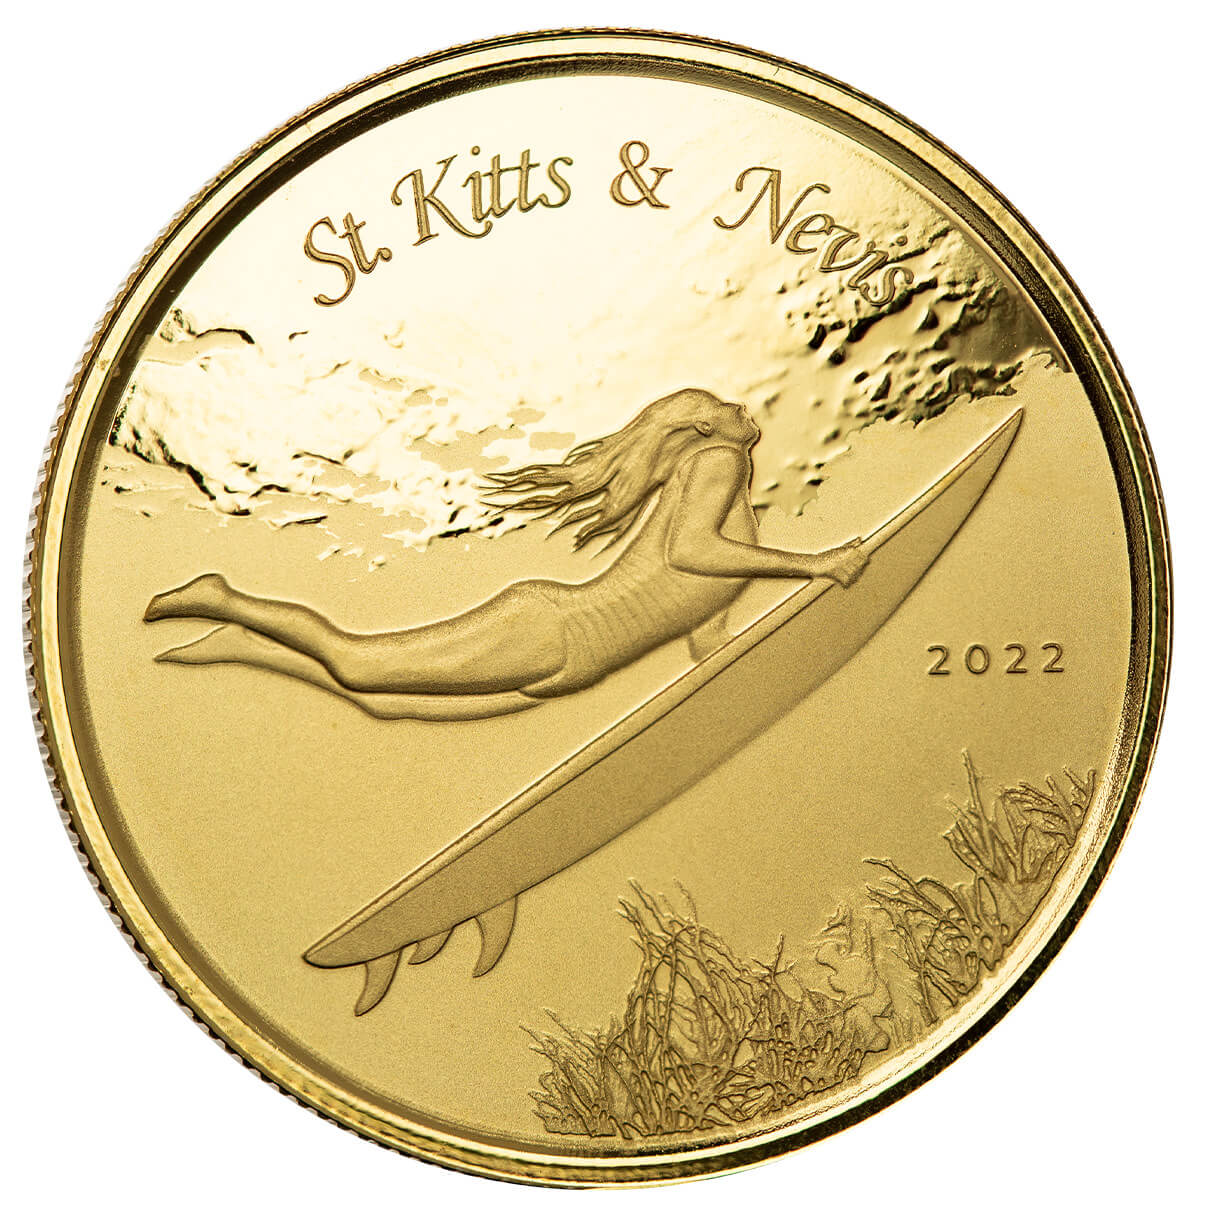 2022 Scottsdale Mint Ec8 St Kitts And Nevis Underwater Surfer 1 Oz Gold Proof Like Coin 02